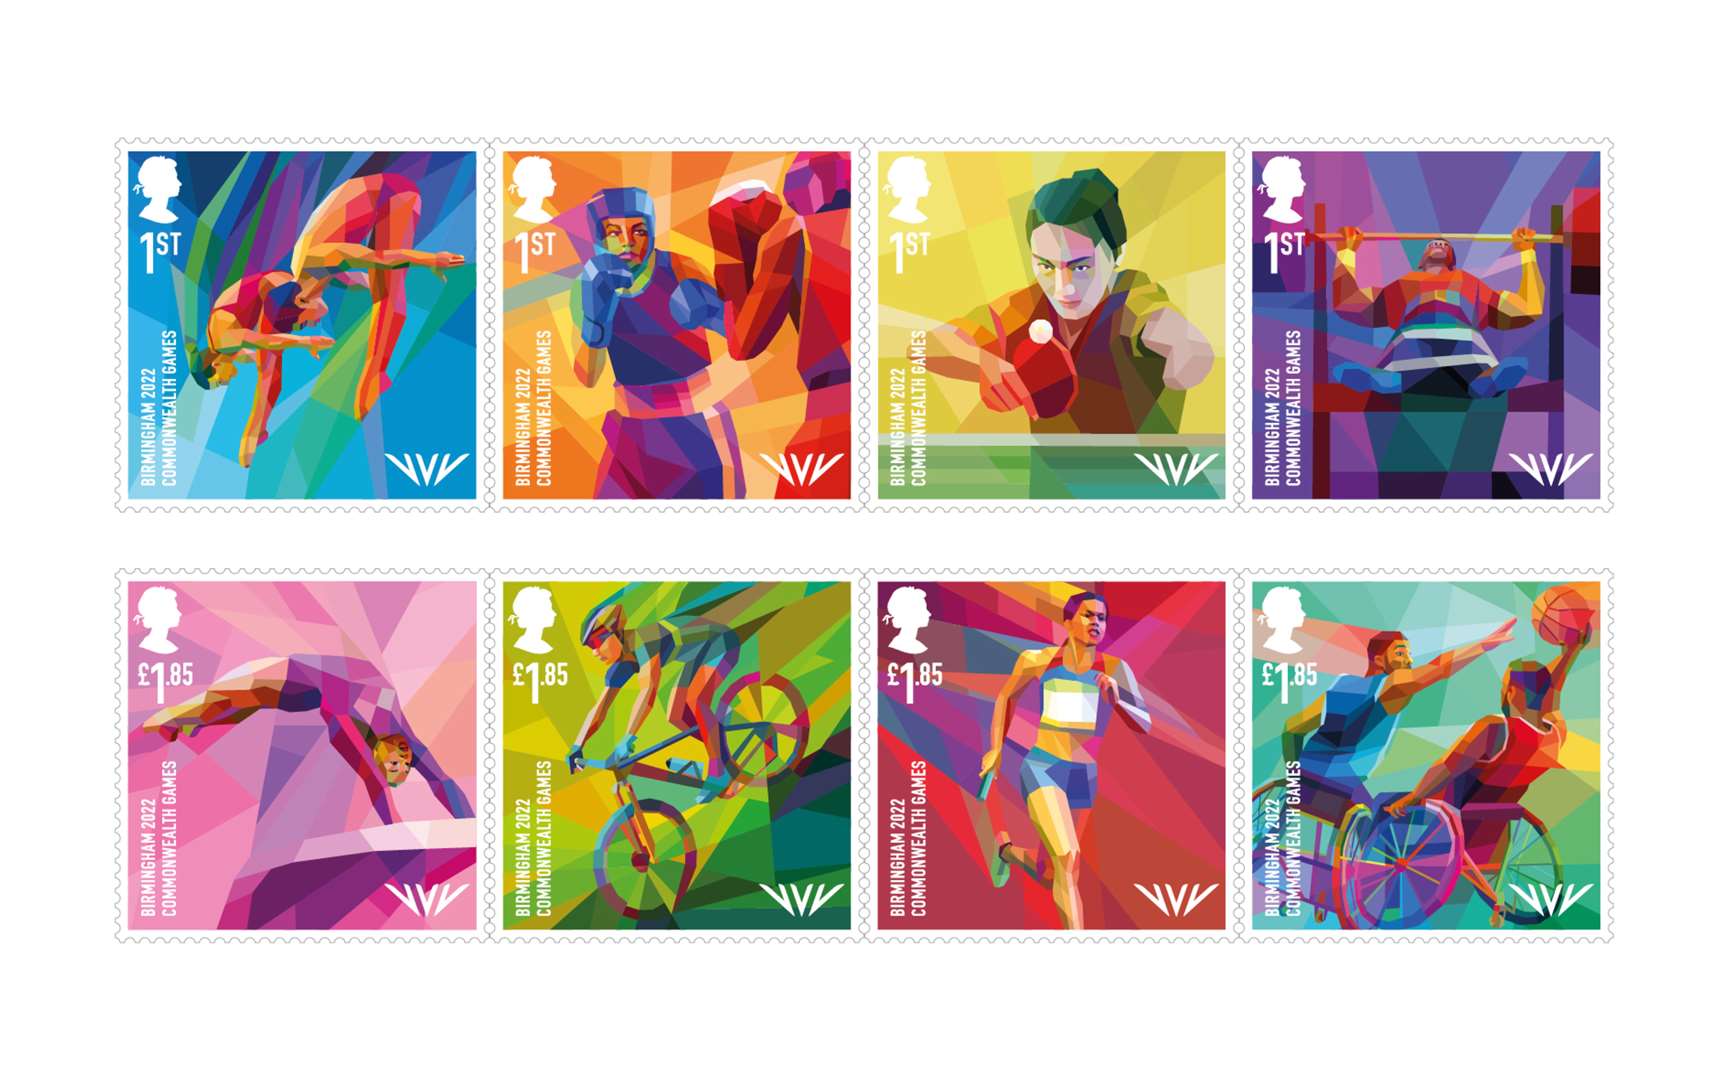 Royal Mail has designed eight stamps to mark the games in Birmingham